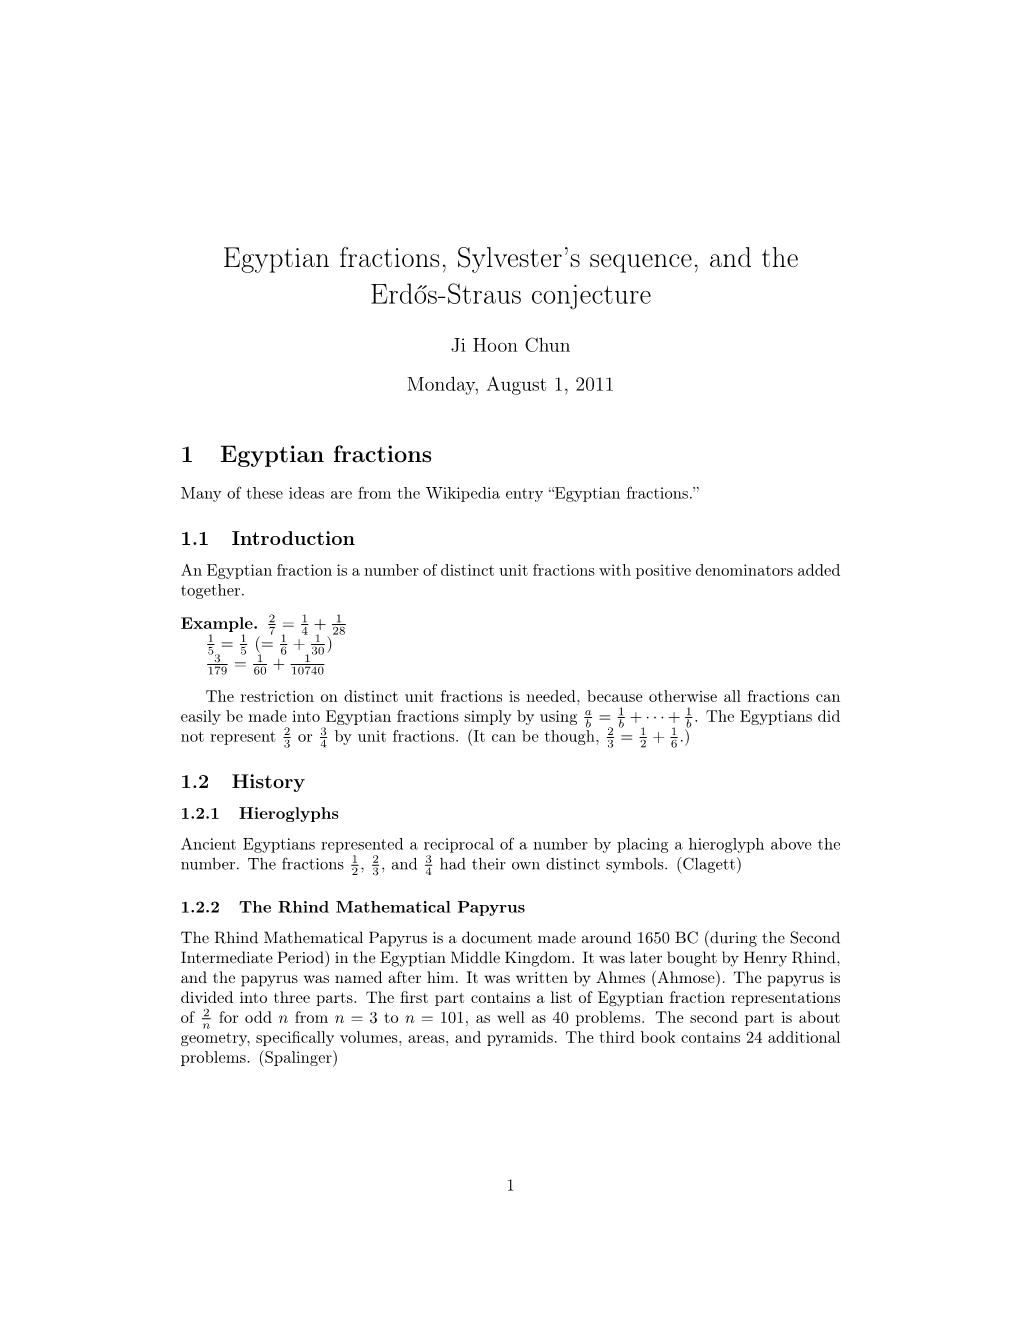 Egyptian Fractions, Sylvester's Sequence, and the Erdős-Straus Conjecture